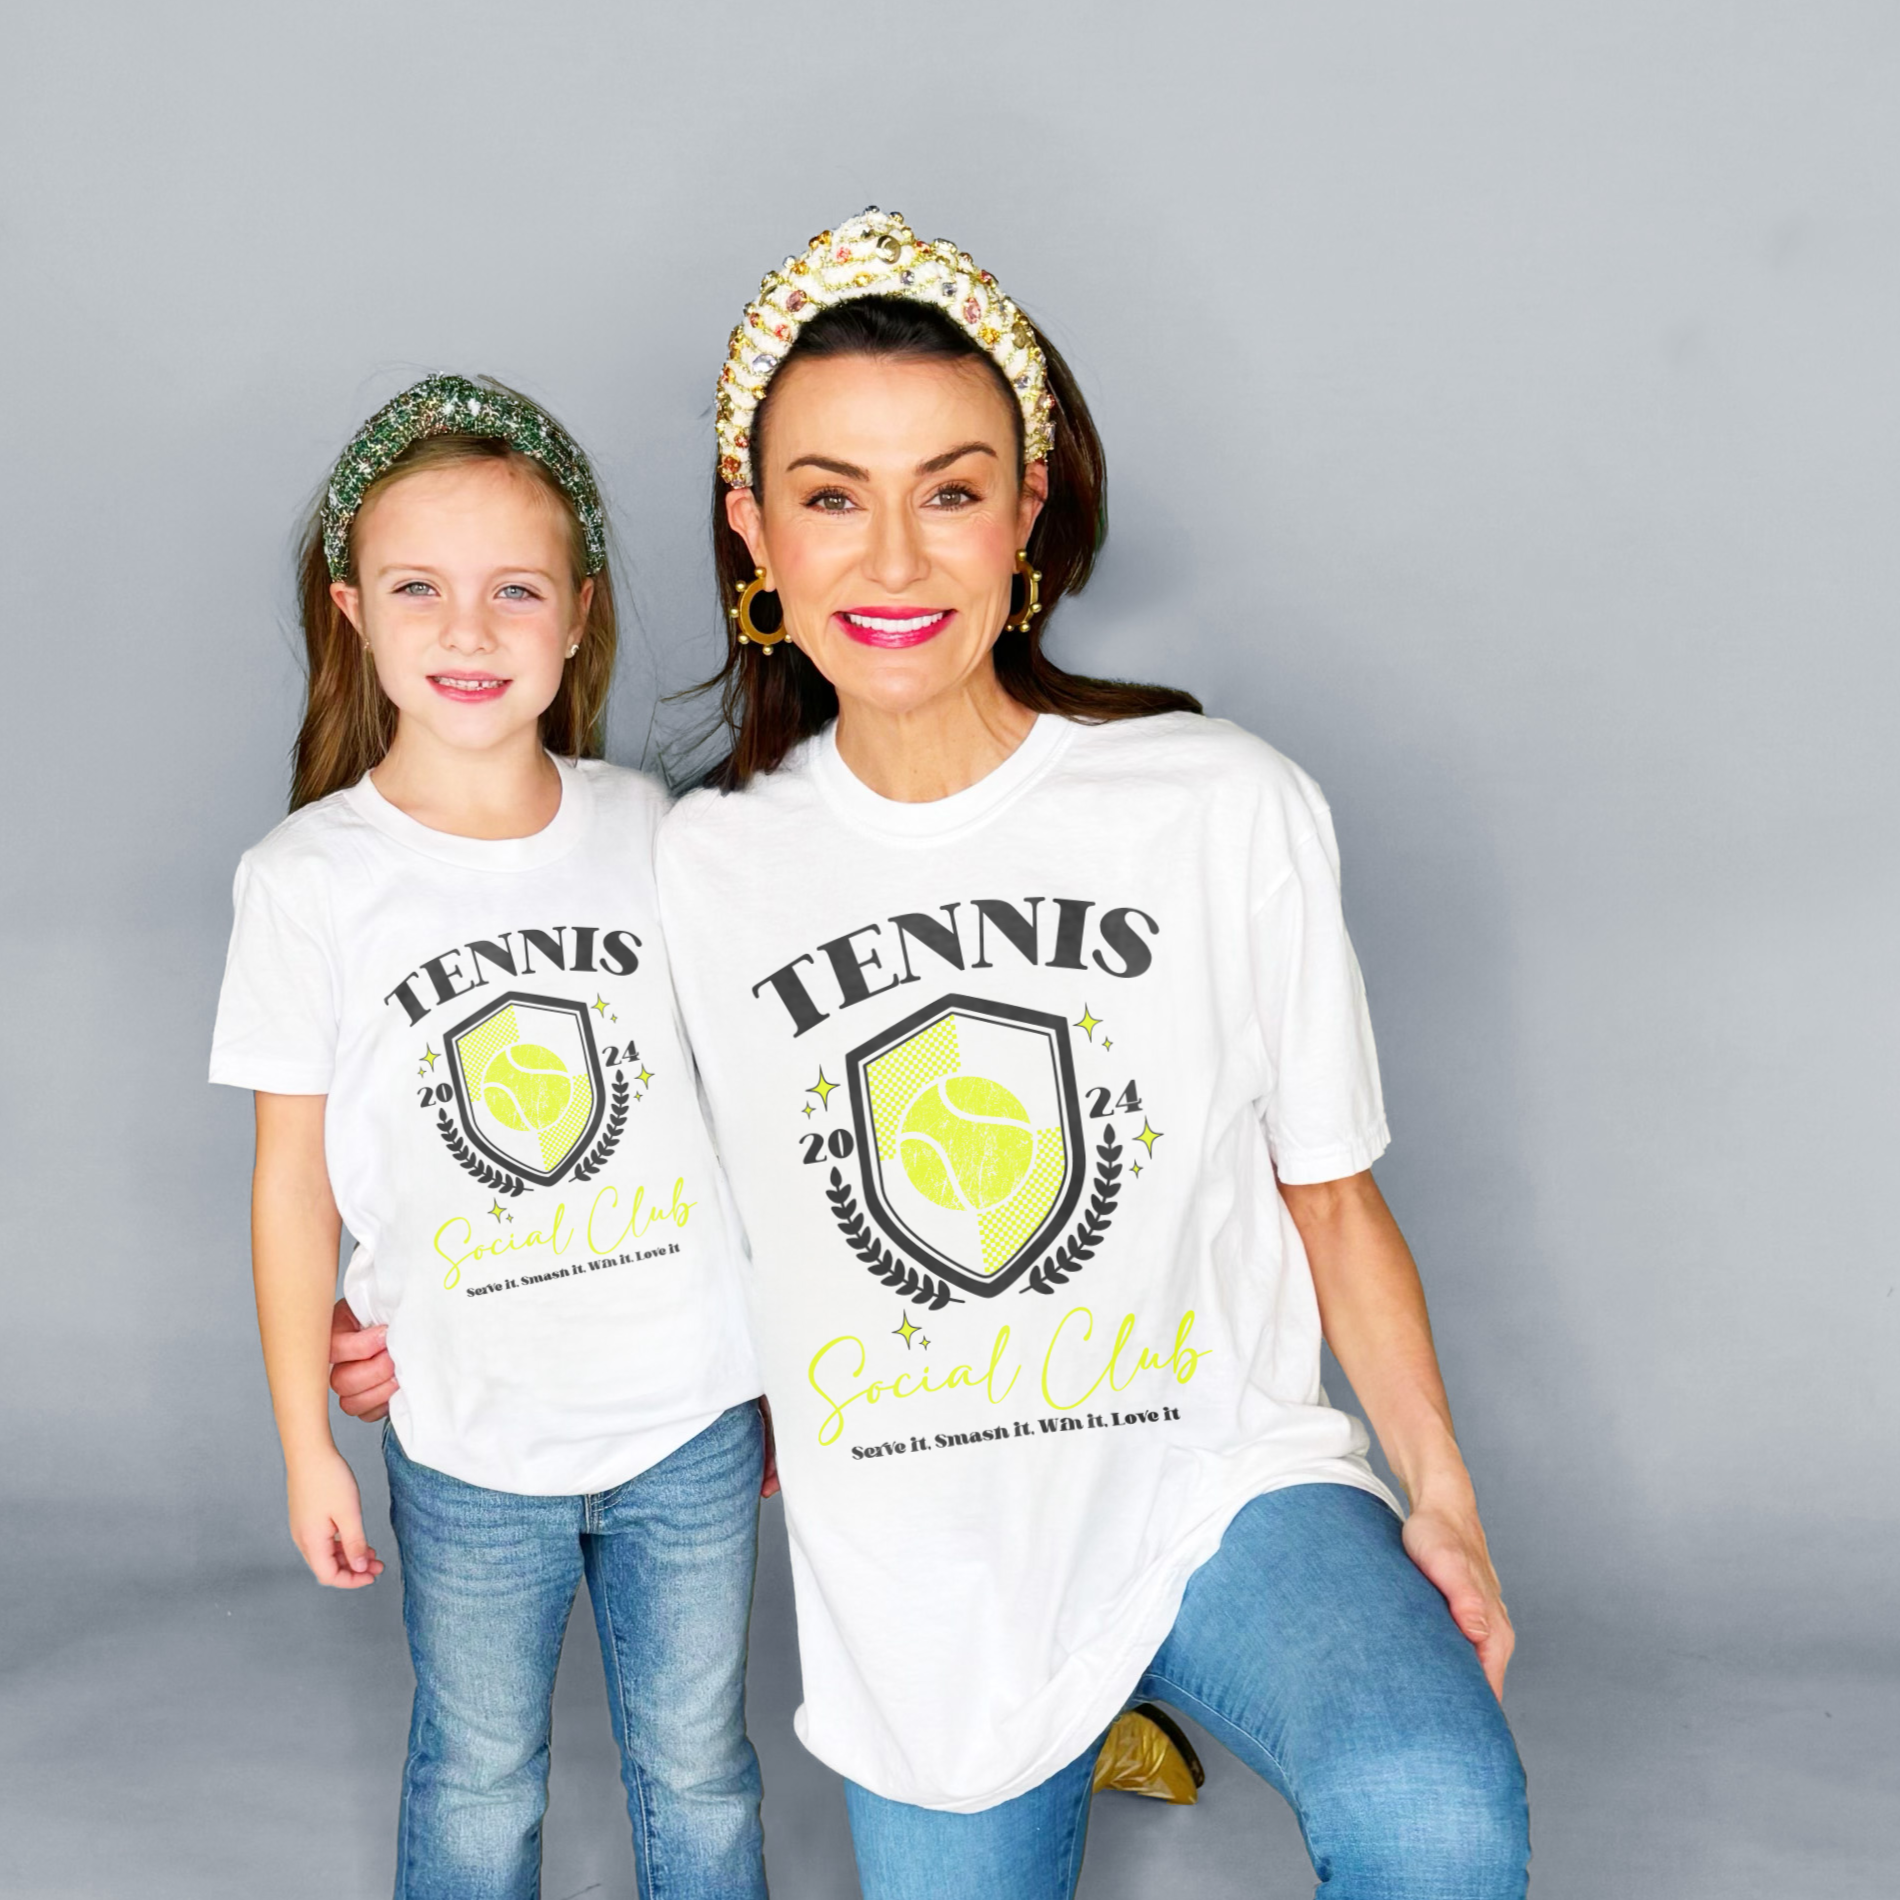 Tennis Social Club Youth and Adult Tee